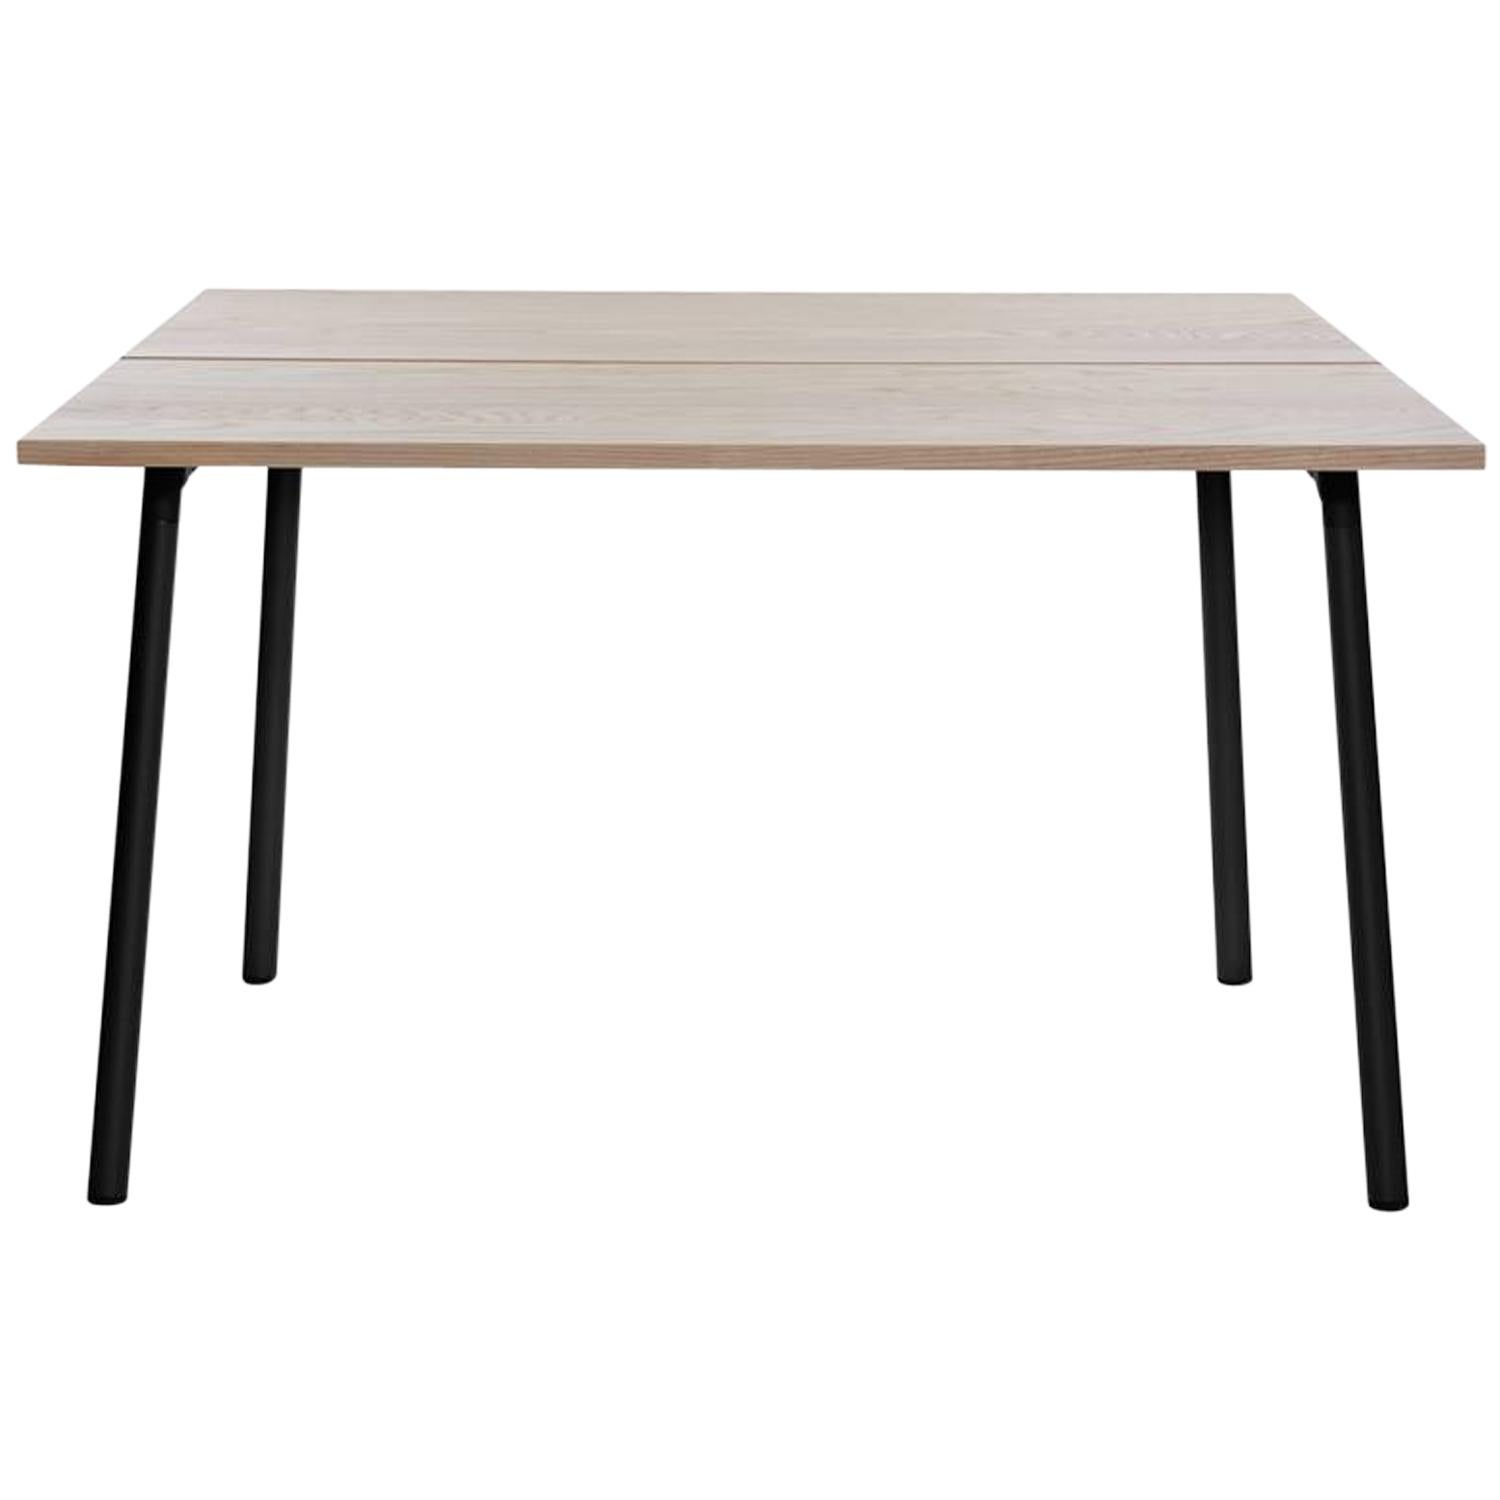 Emeco Run Medium Table in Black Powder-Coat and Ash by Sam Hecht & Kim Colin For Sale